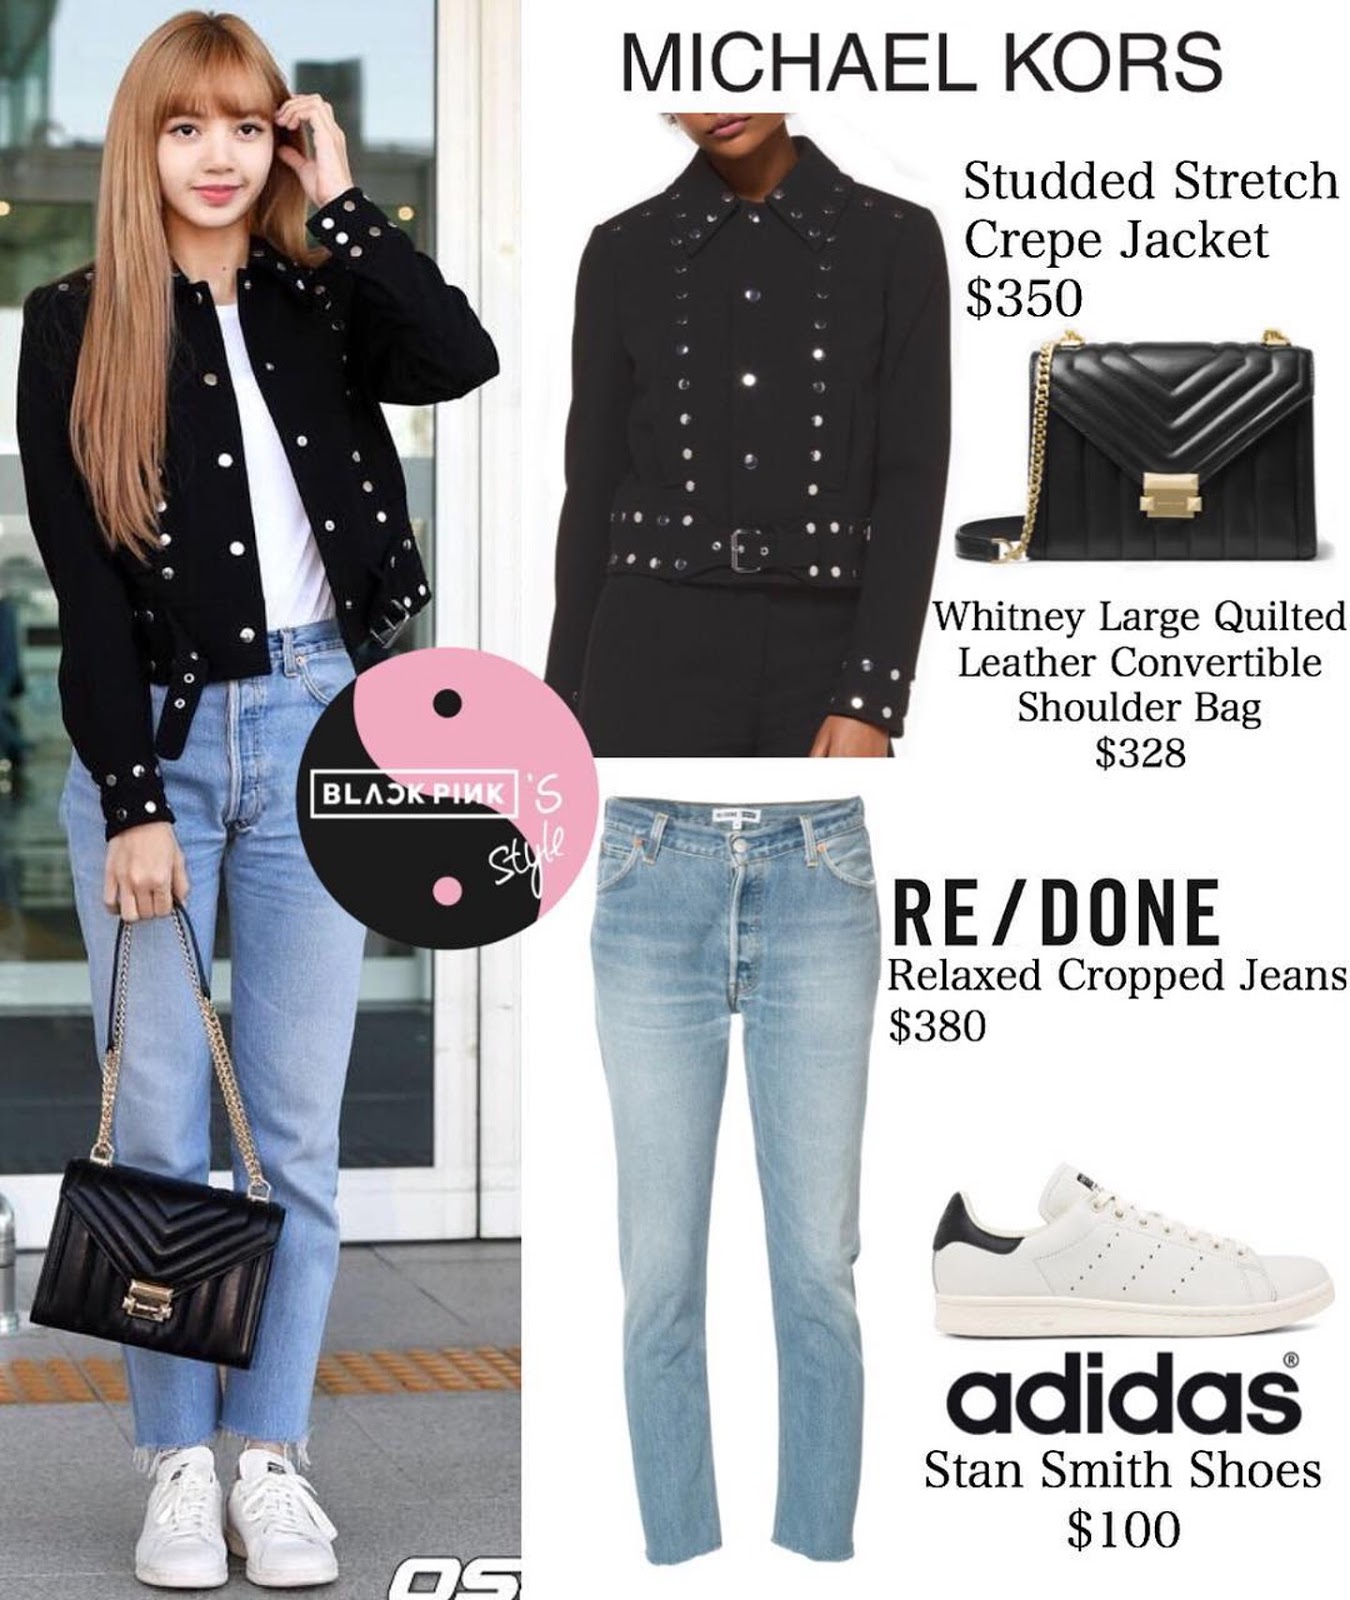 Steal That BLACKPINK Look! | Daily K Pop News